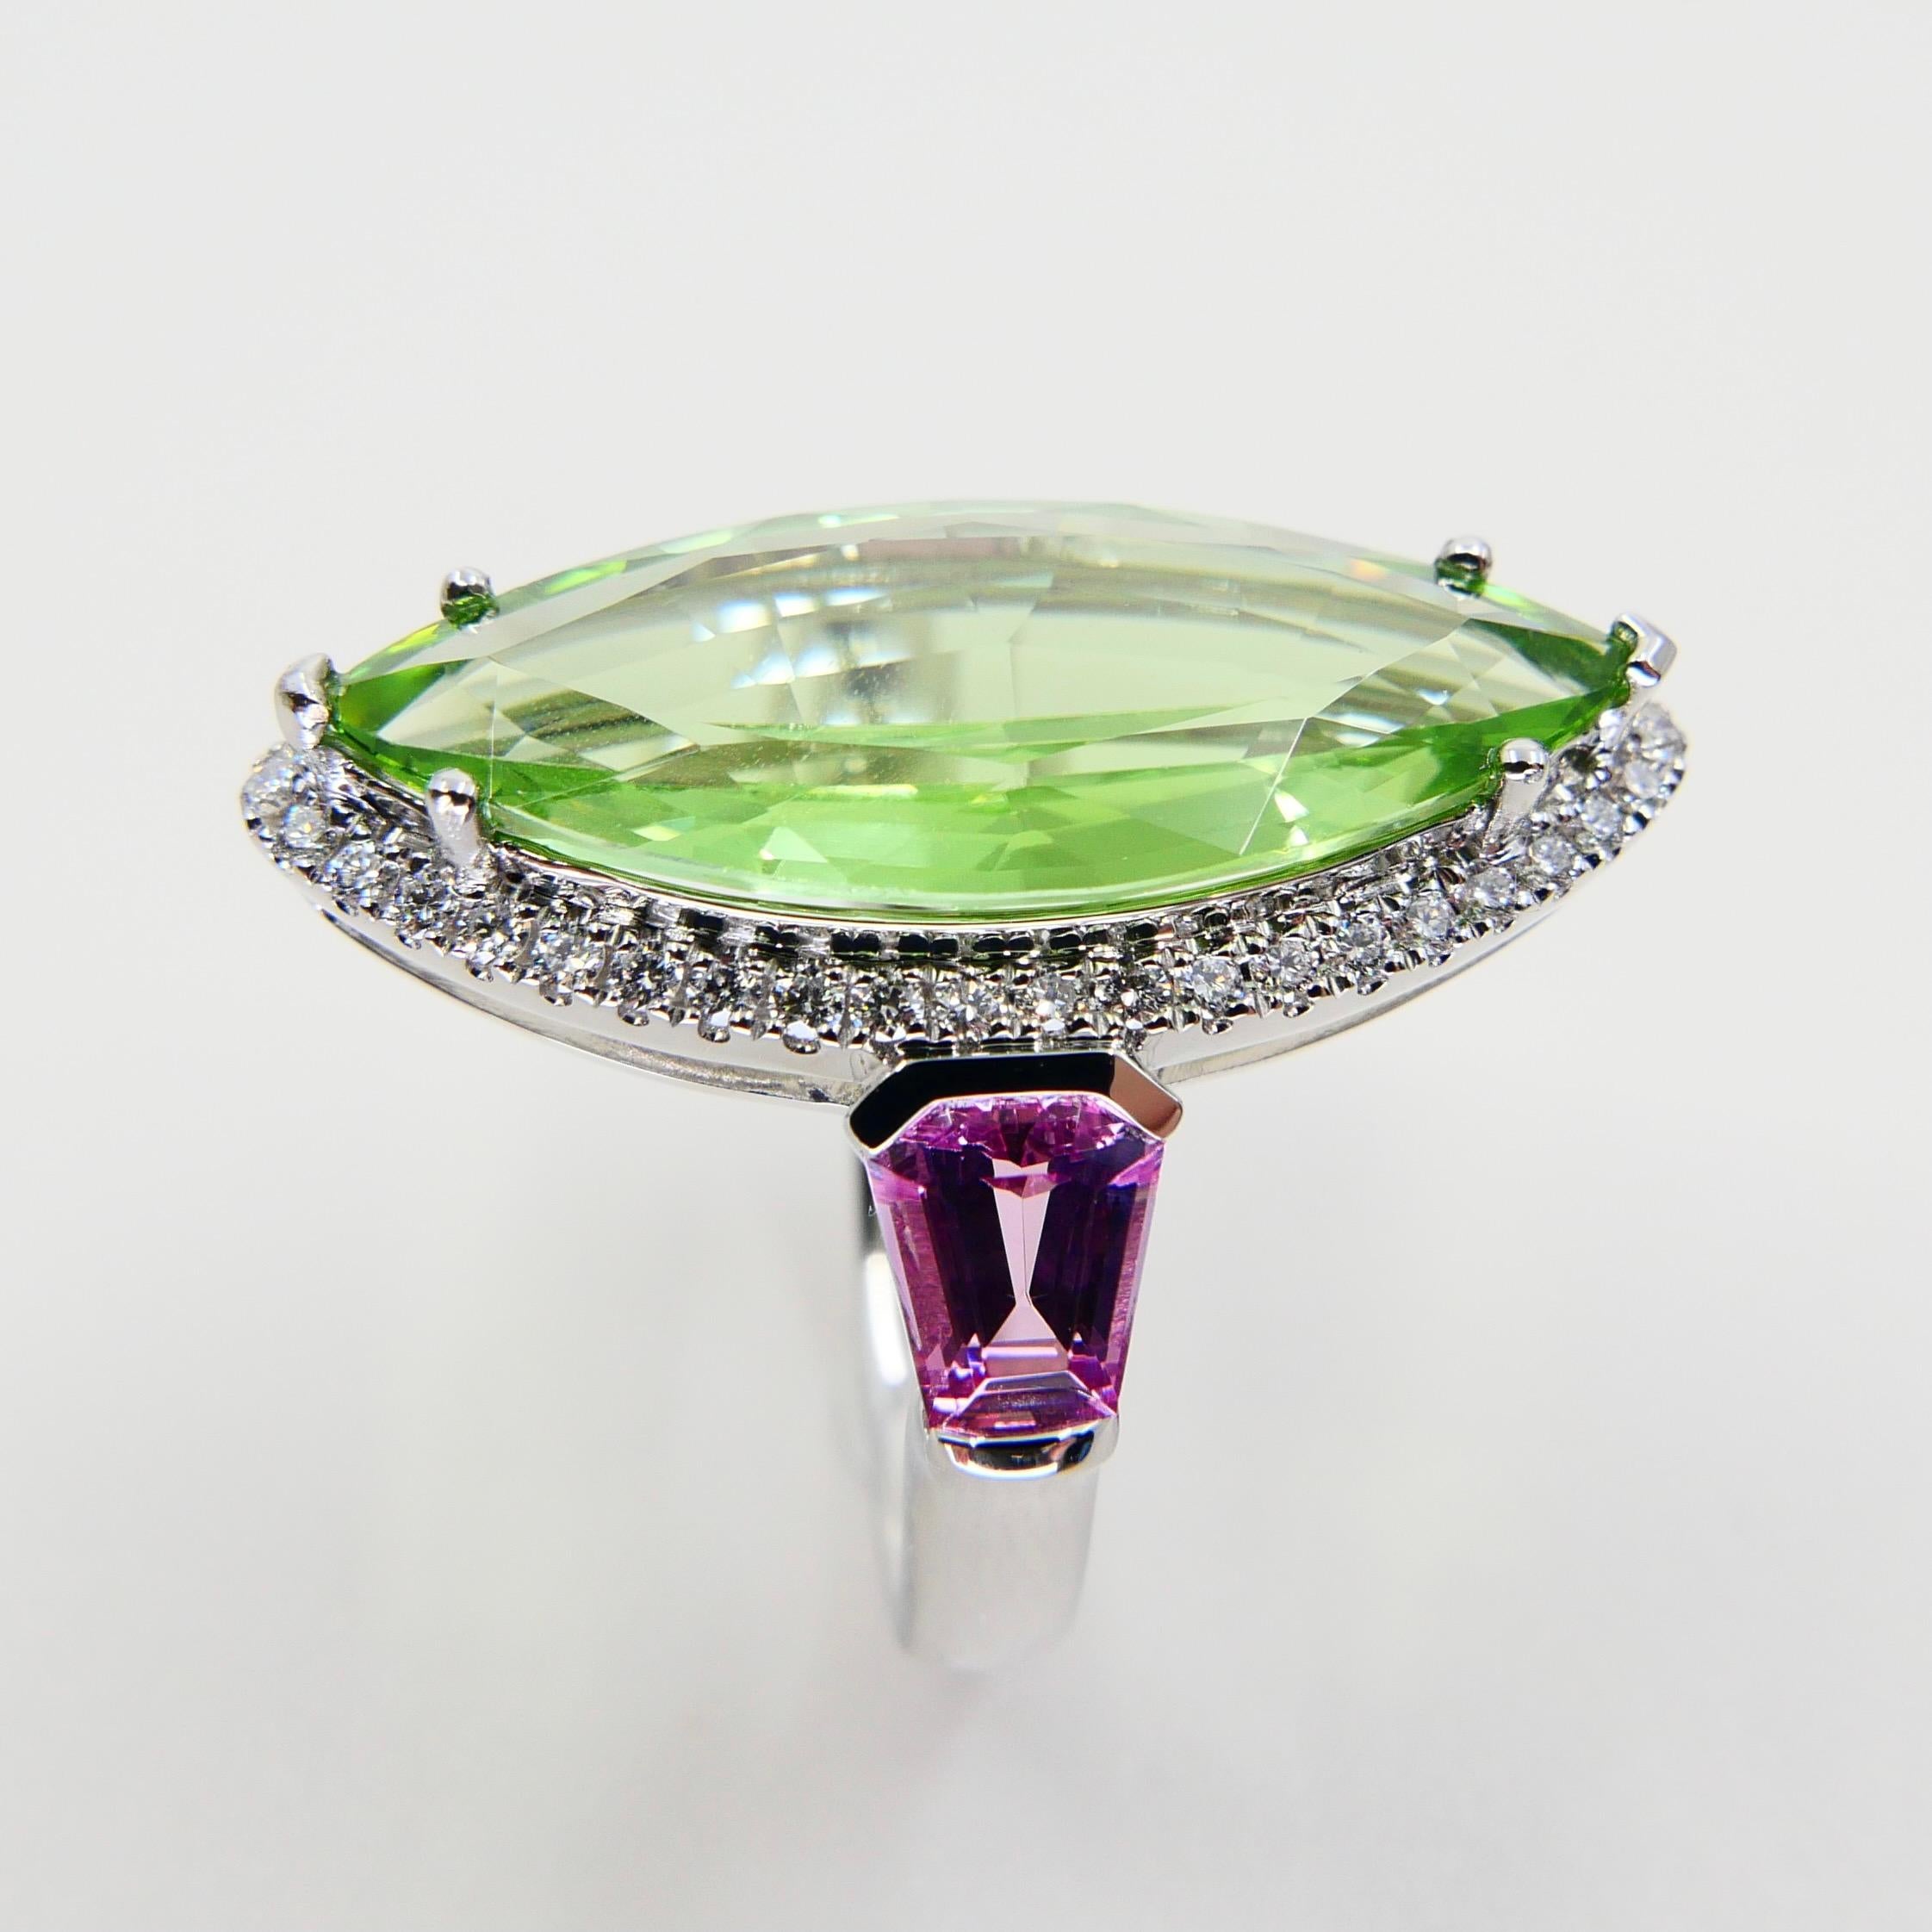 Natural Peridot 7.38 Cts, Pink Spinel & Diamond Cocktail Ring, Statement Piece 2